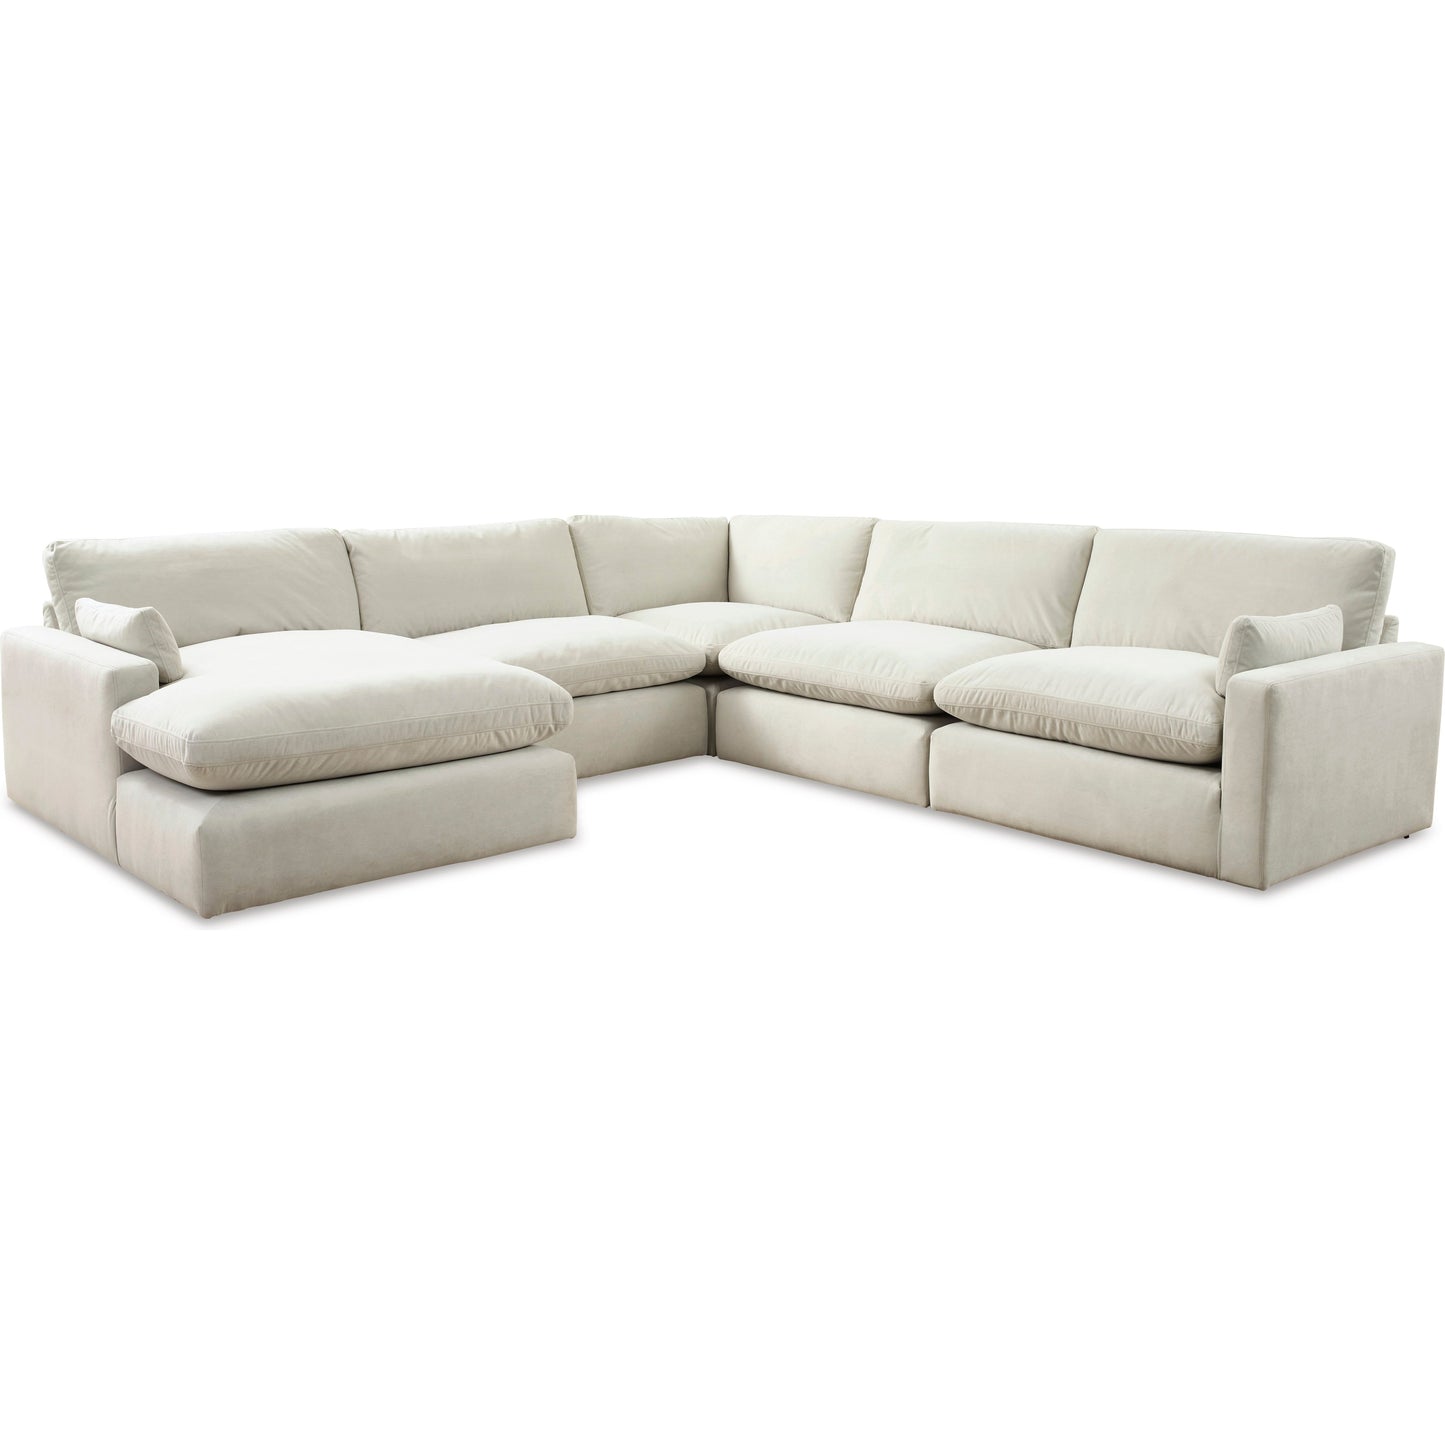 SOPHIE 5 PIECE SECTIONAL - IVORY